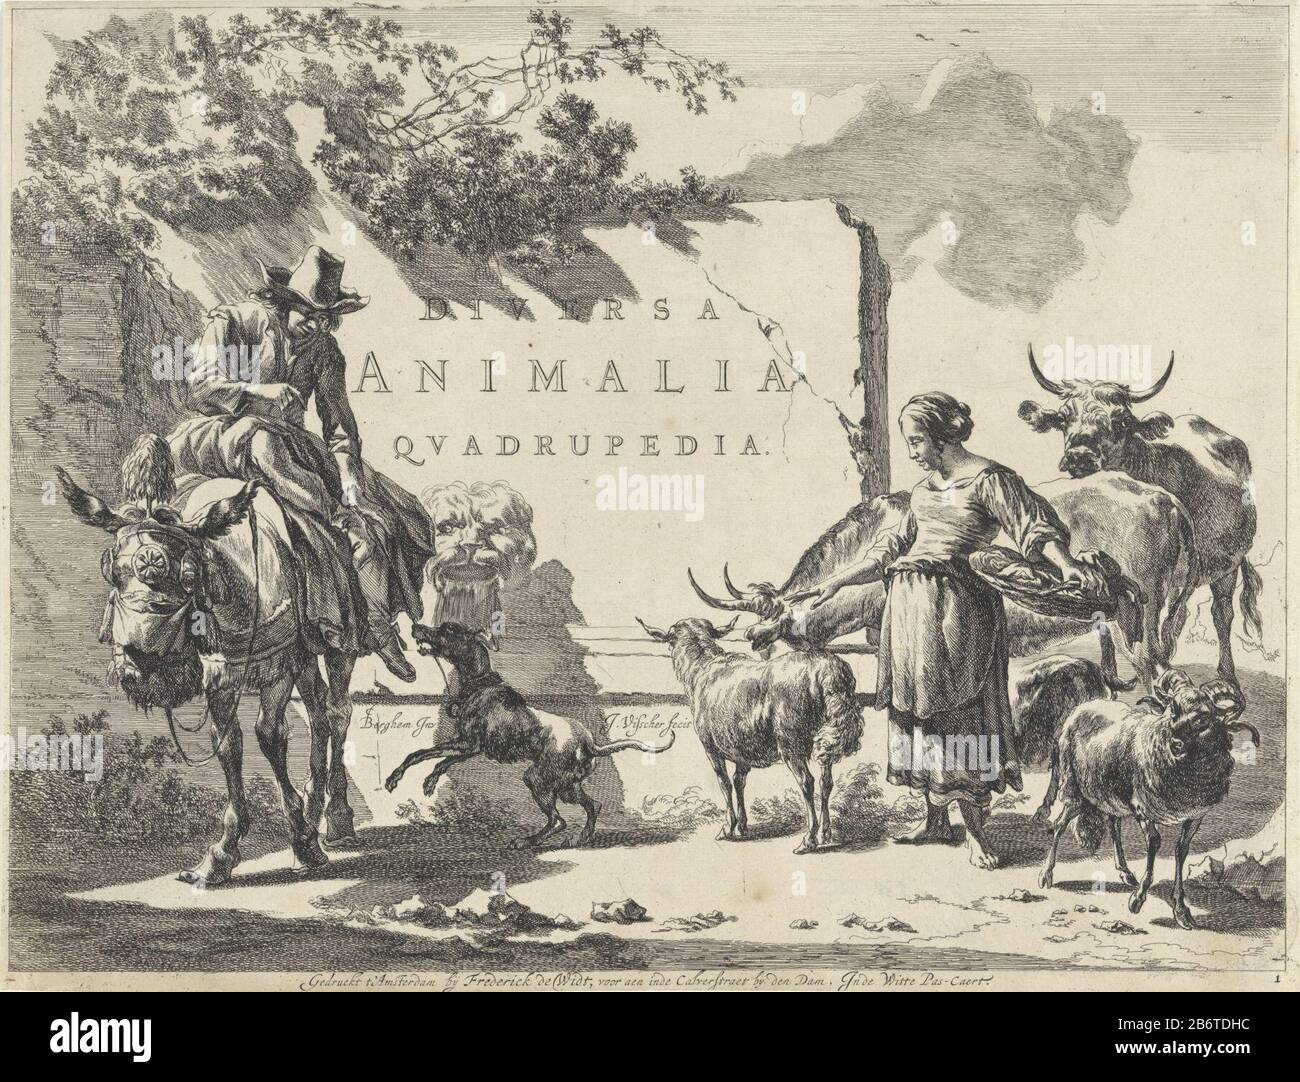 Herder en herderin bij een fontein Landschappen met viervoeters (serietitel) Diversa Animalia Quadrupedia (serietitel op object) For a fountain are a shepherd on a donkey and a shepherd with their sheep and cattle. A dog bites in the whip of the herder. Manufacturer : printmaker Jan de Visscher (listed property) designed by: Nicolaes Pietersz. Berchem (listed on object) Publisher: Frederik de Wit (listed property) Place manufacture: printmaker: Northern Netherlands Publisher: Amsterdam Date: 1657 - 1706 Physical features: etching and engra material: paper Technique: etching / engra (printing p Stock Photo